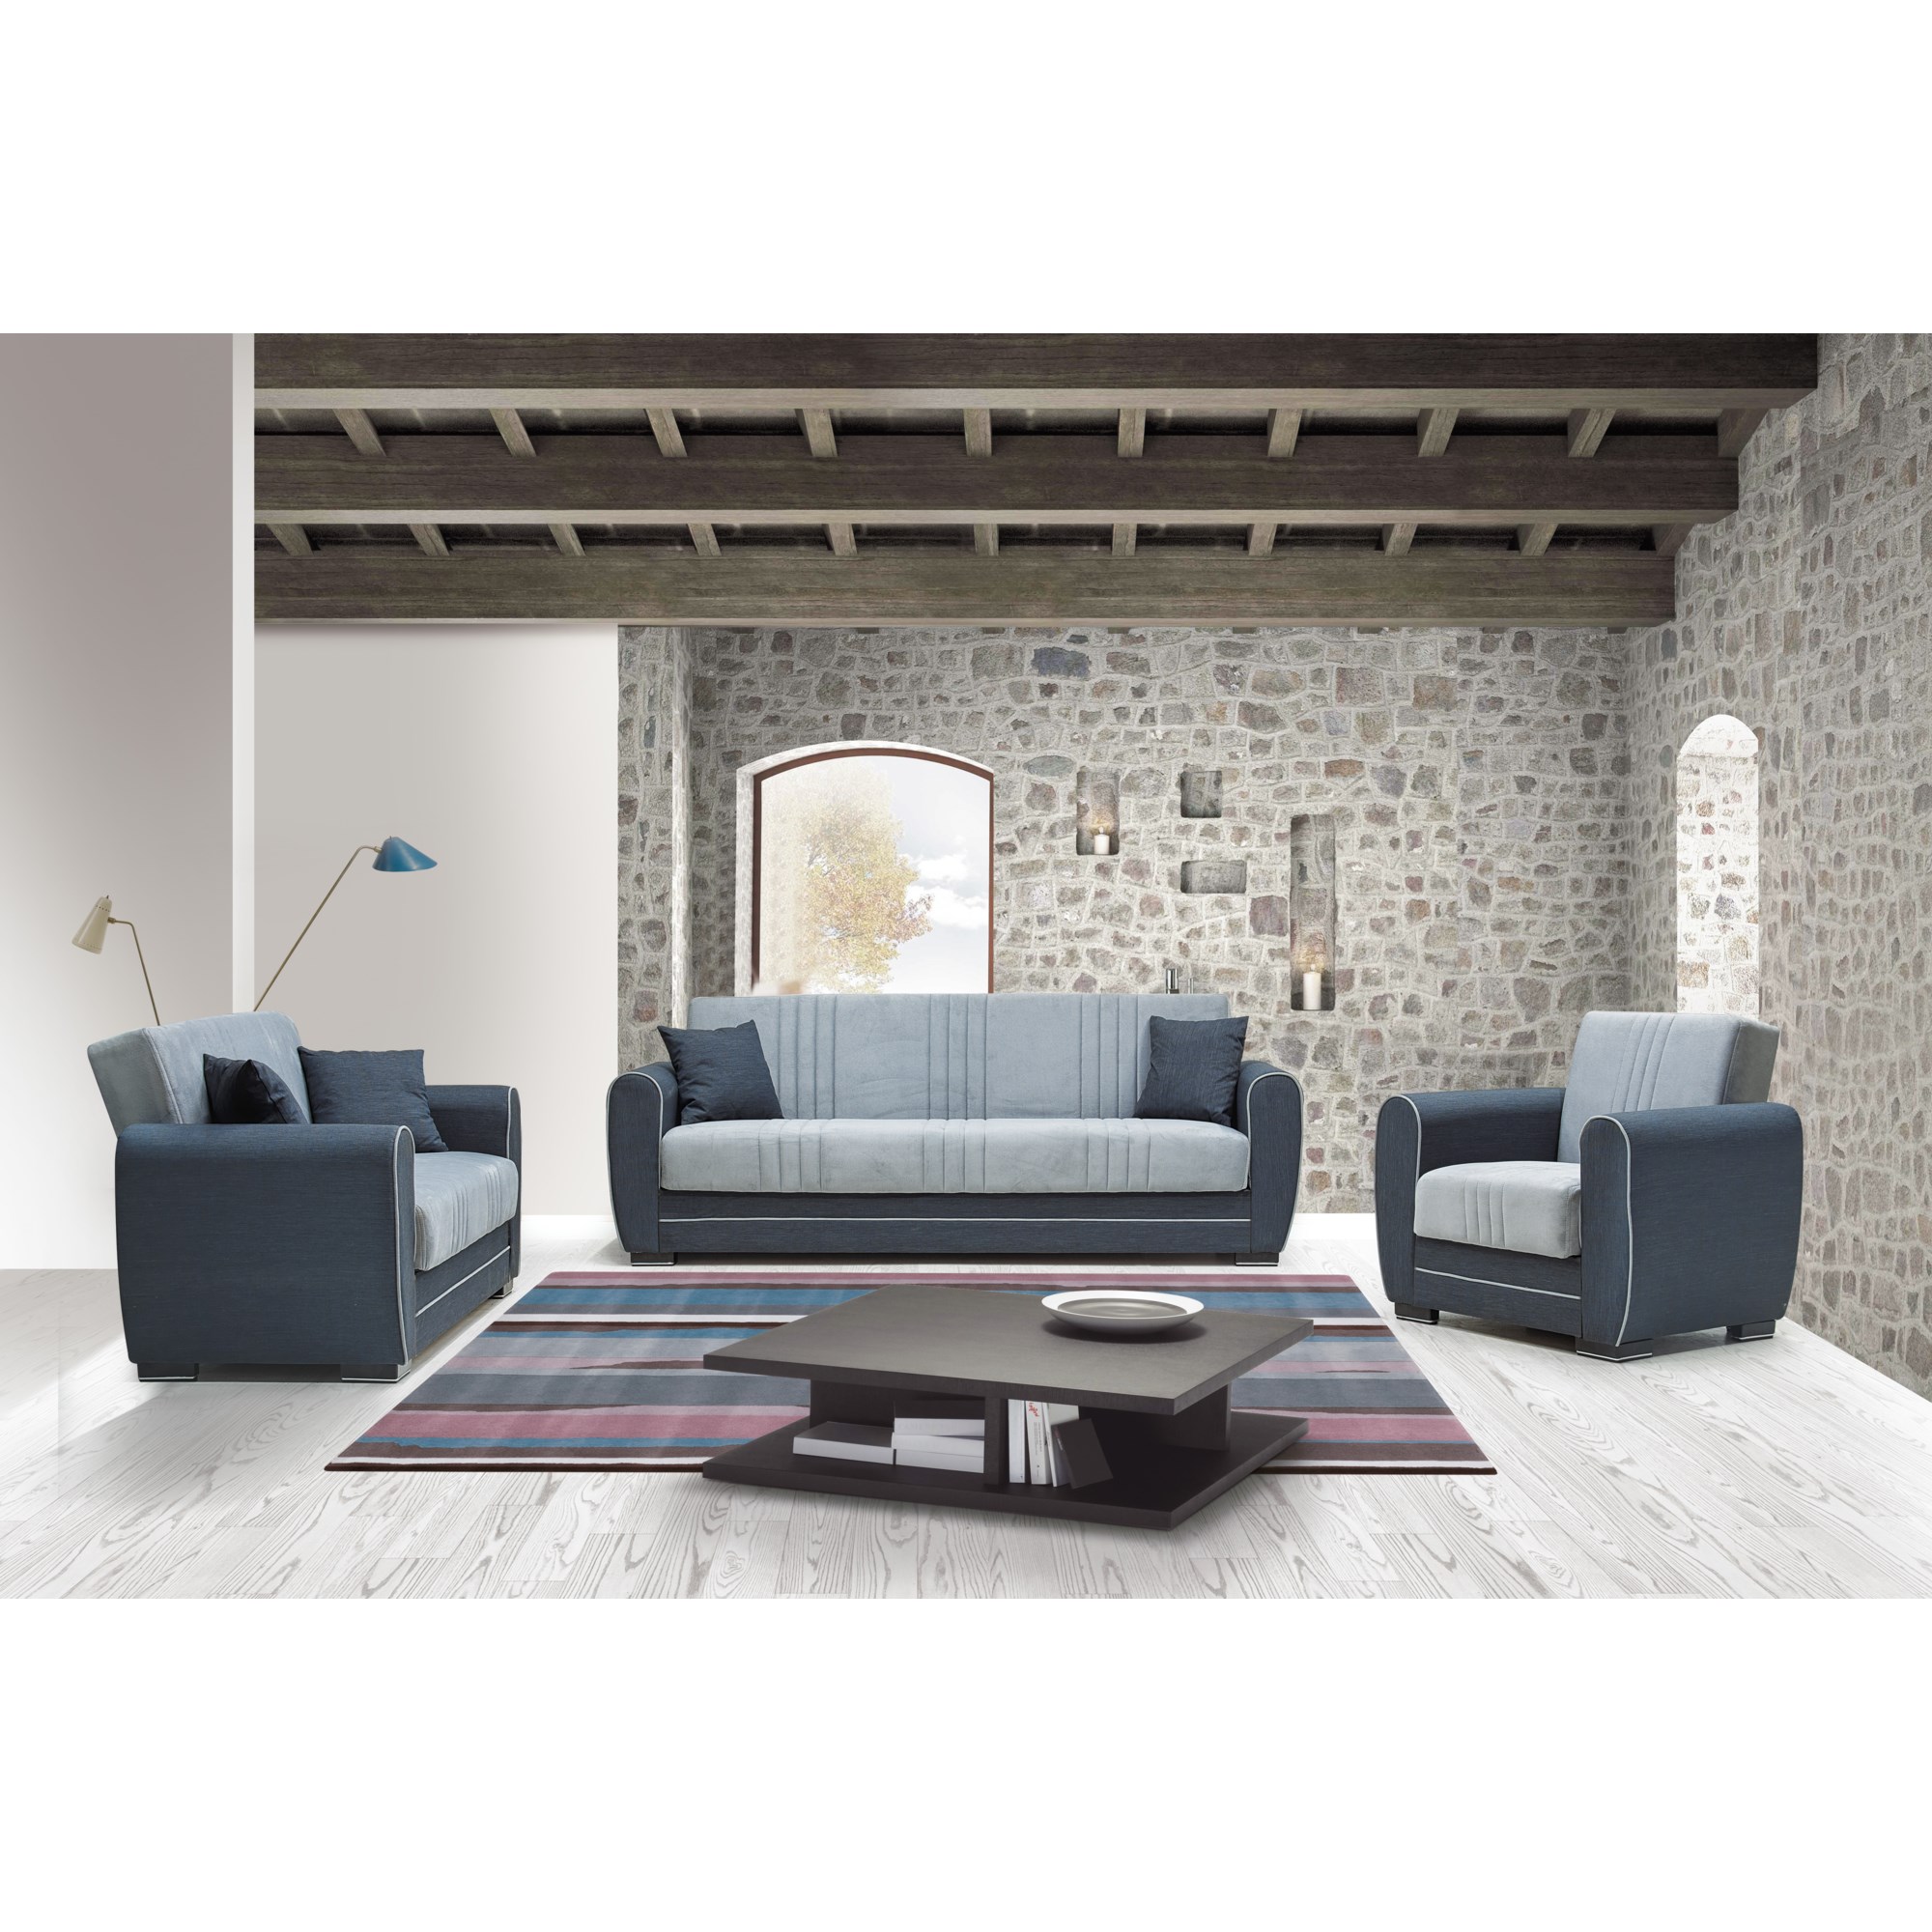 Convertible Fabric Sofa Bed 2 3 Seater Click Clack Recliner Sofabed Couch  Settee